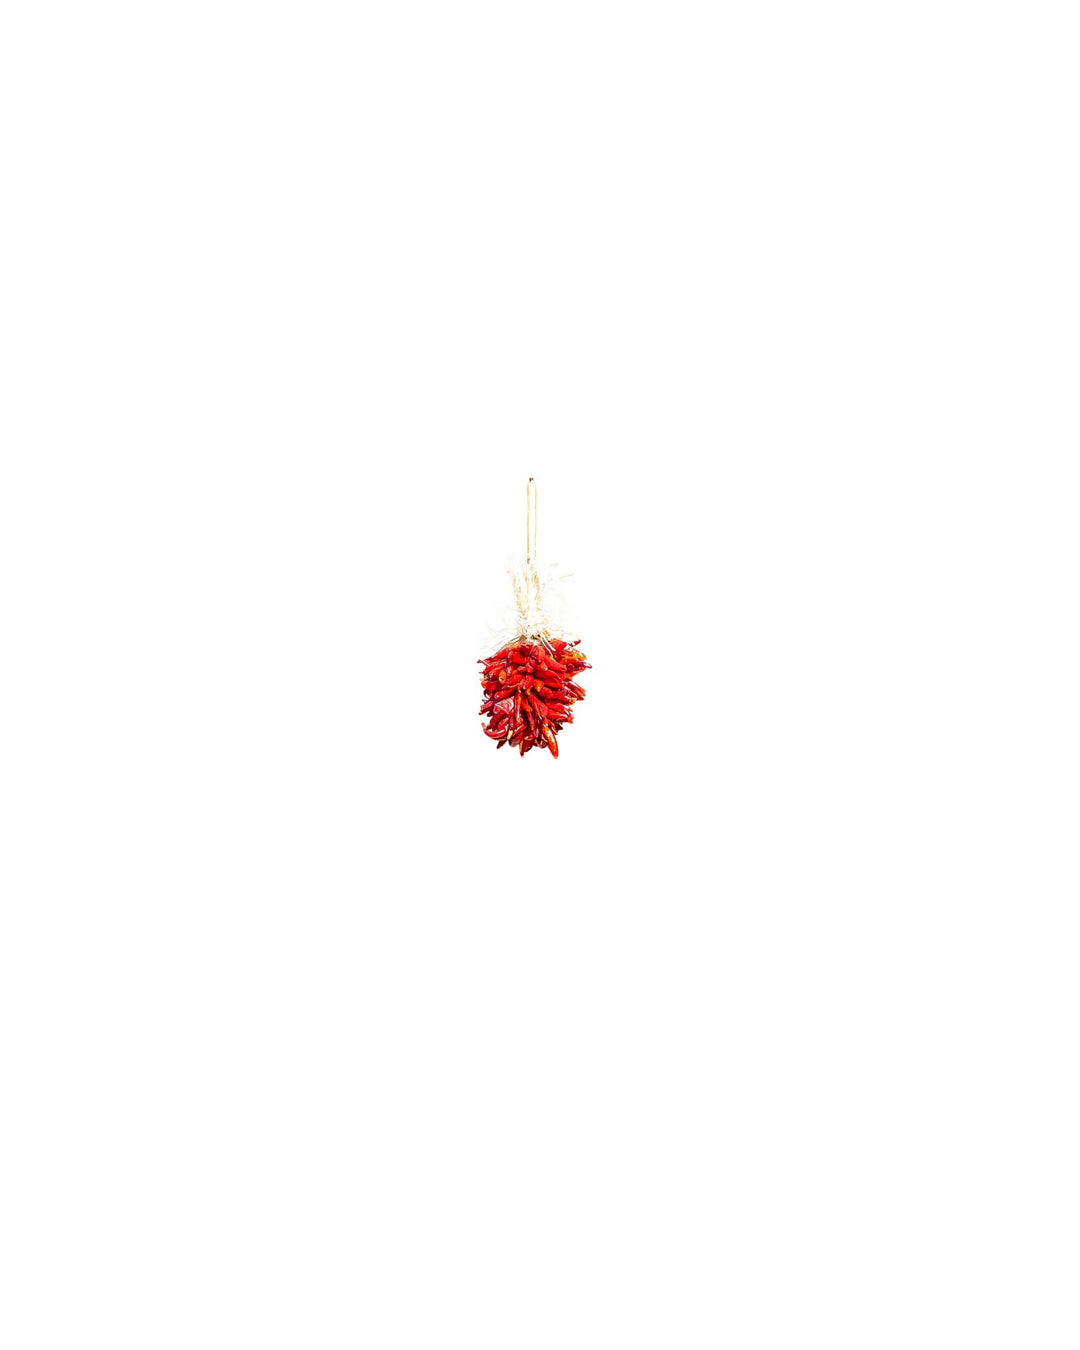 A single Chile Pequin Ristras hangs vertically against a plain white background, embodying New Mexican charm.